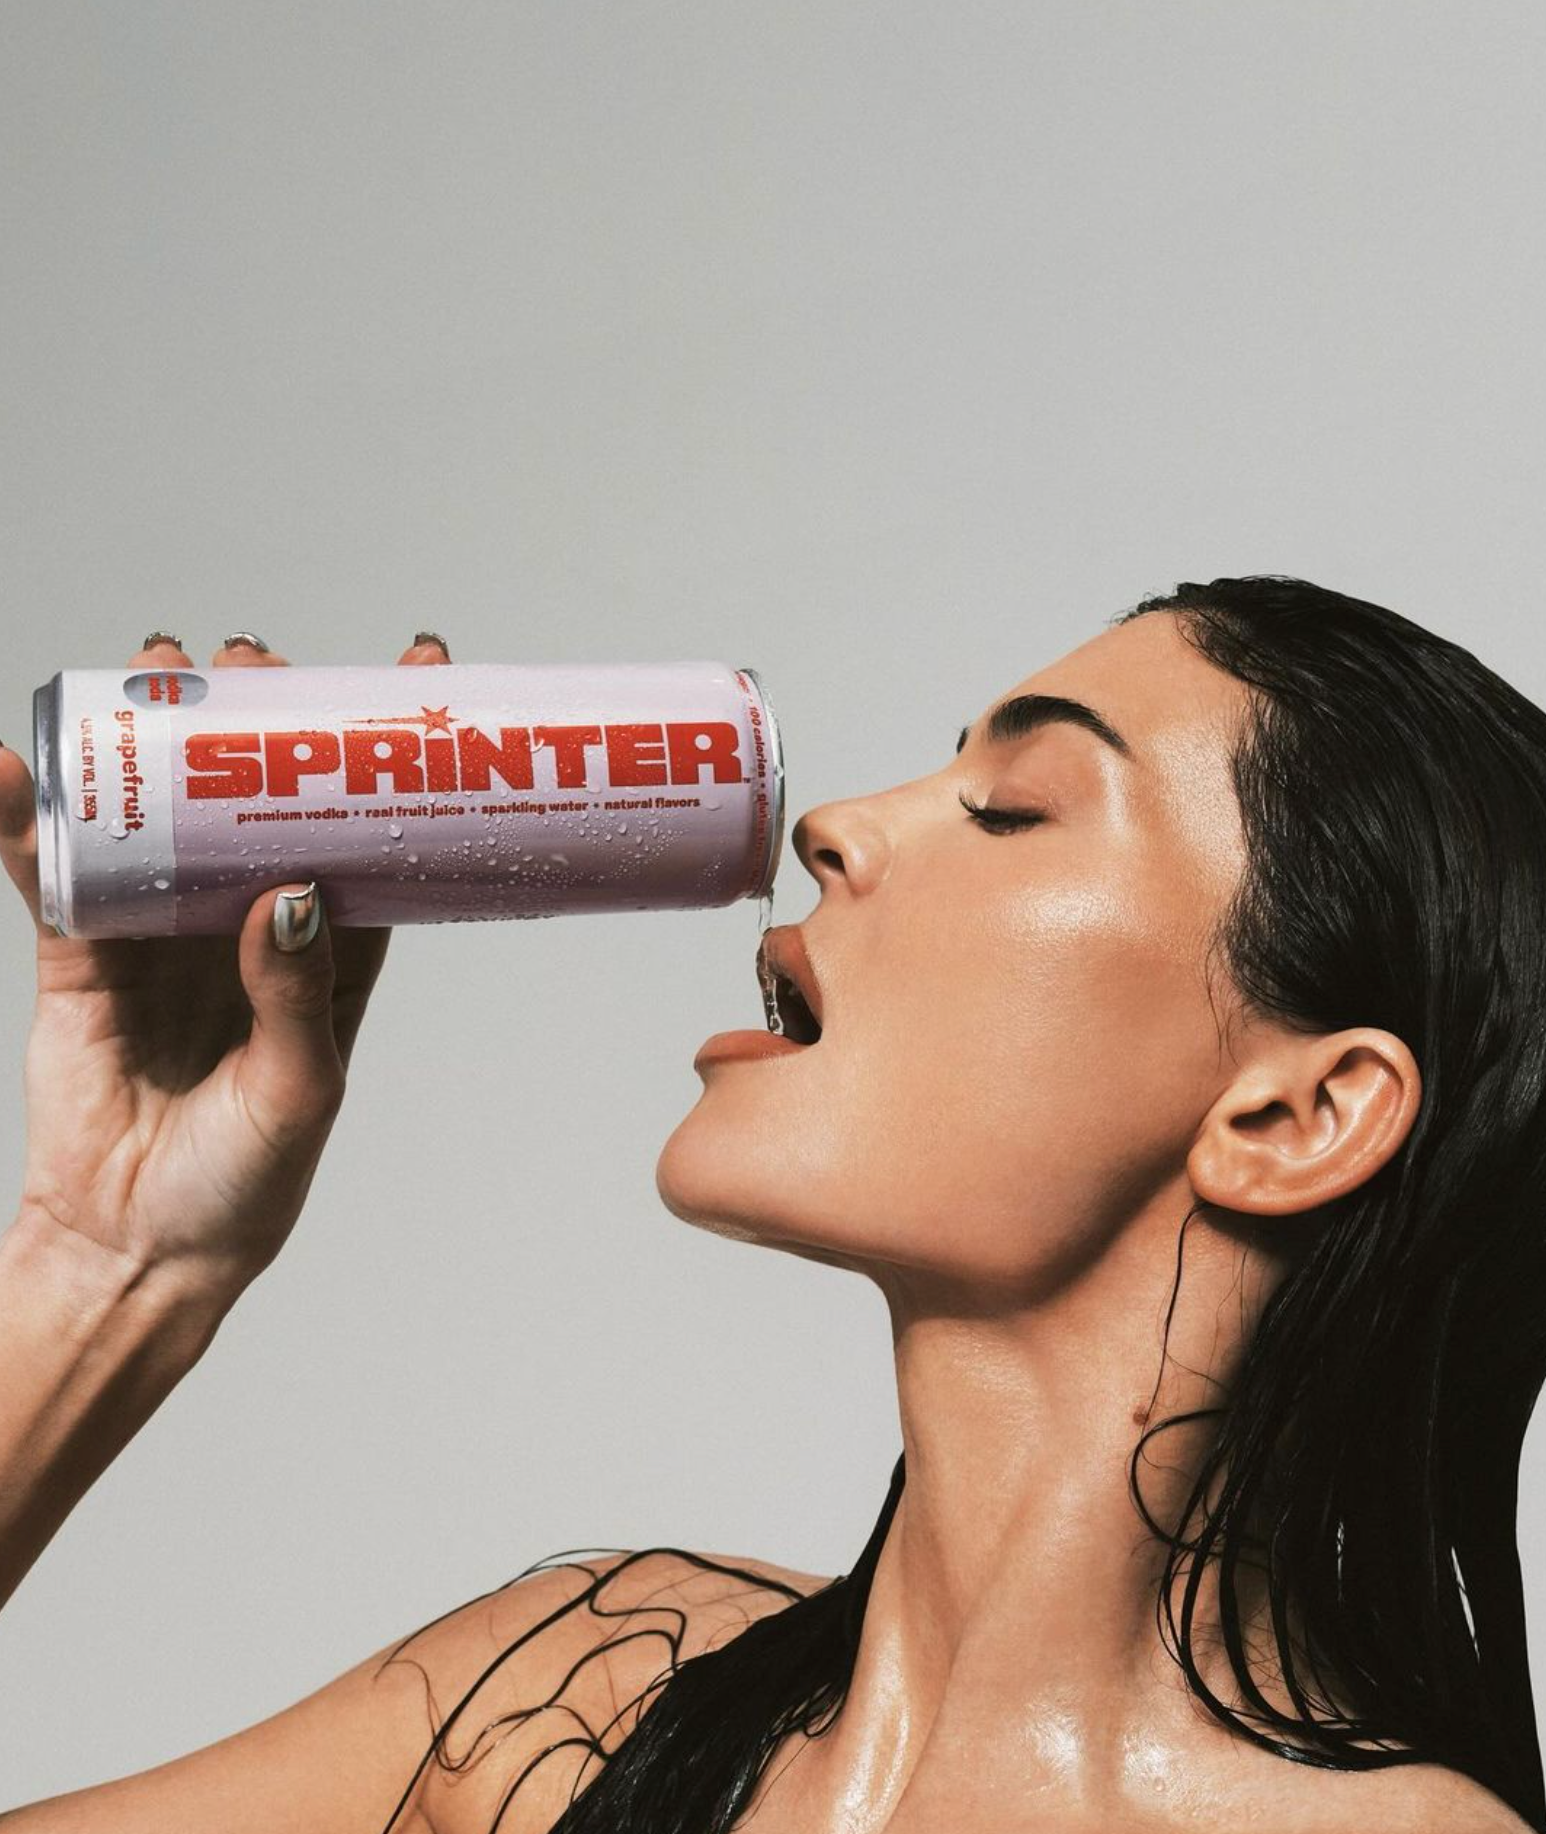 Sprinter Vodka Soda Variety Pack (8 Cans) by Kylie Jenner